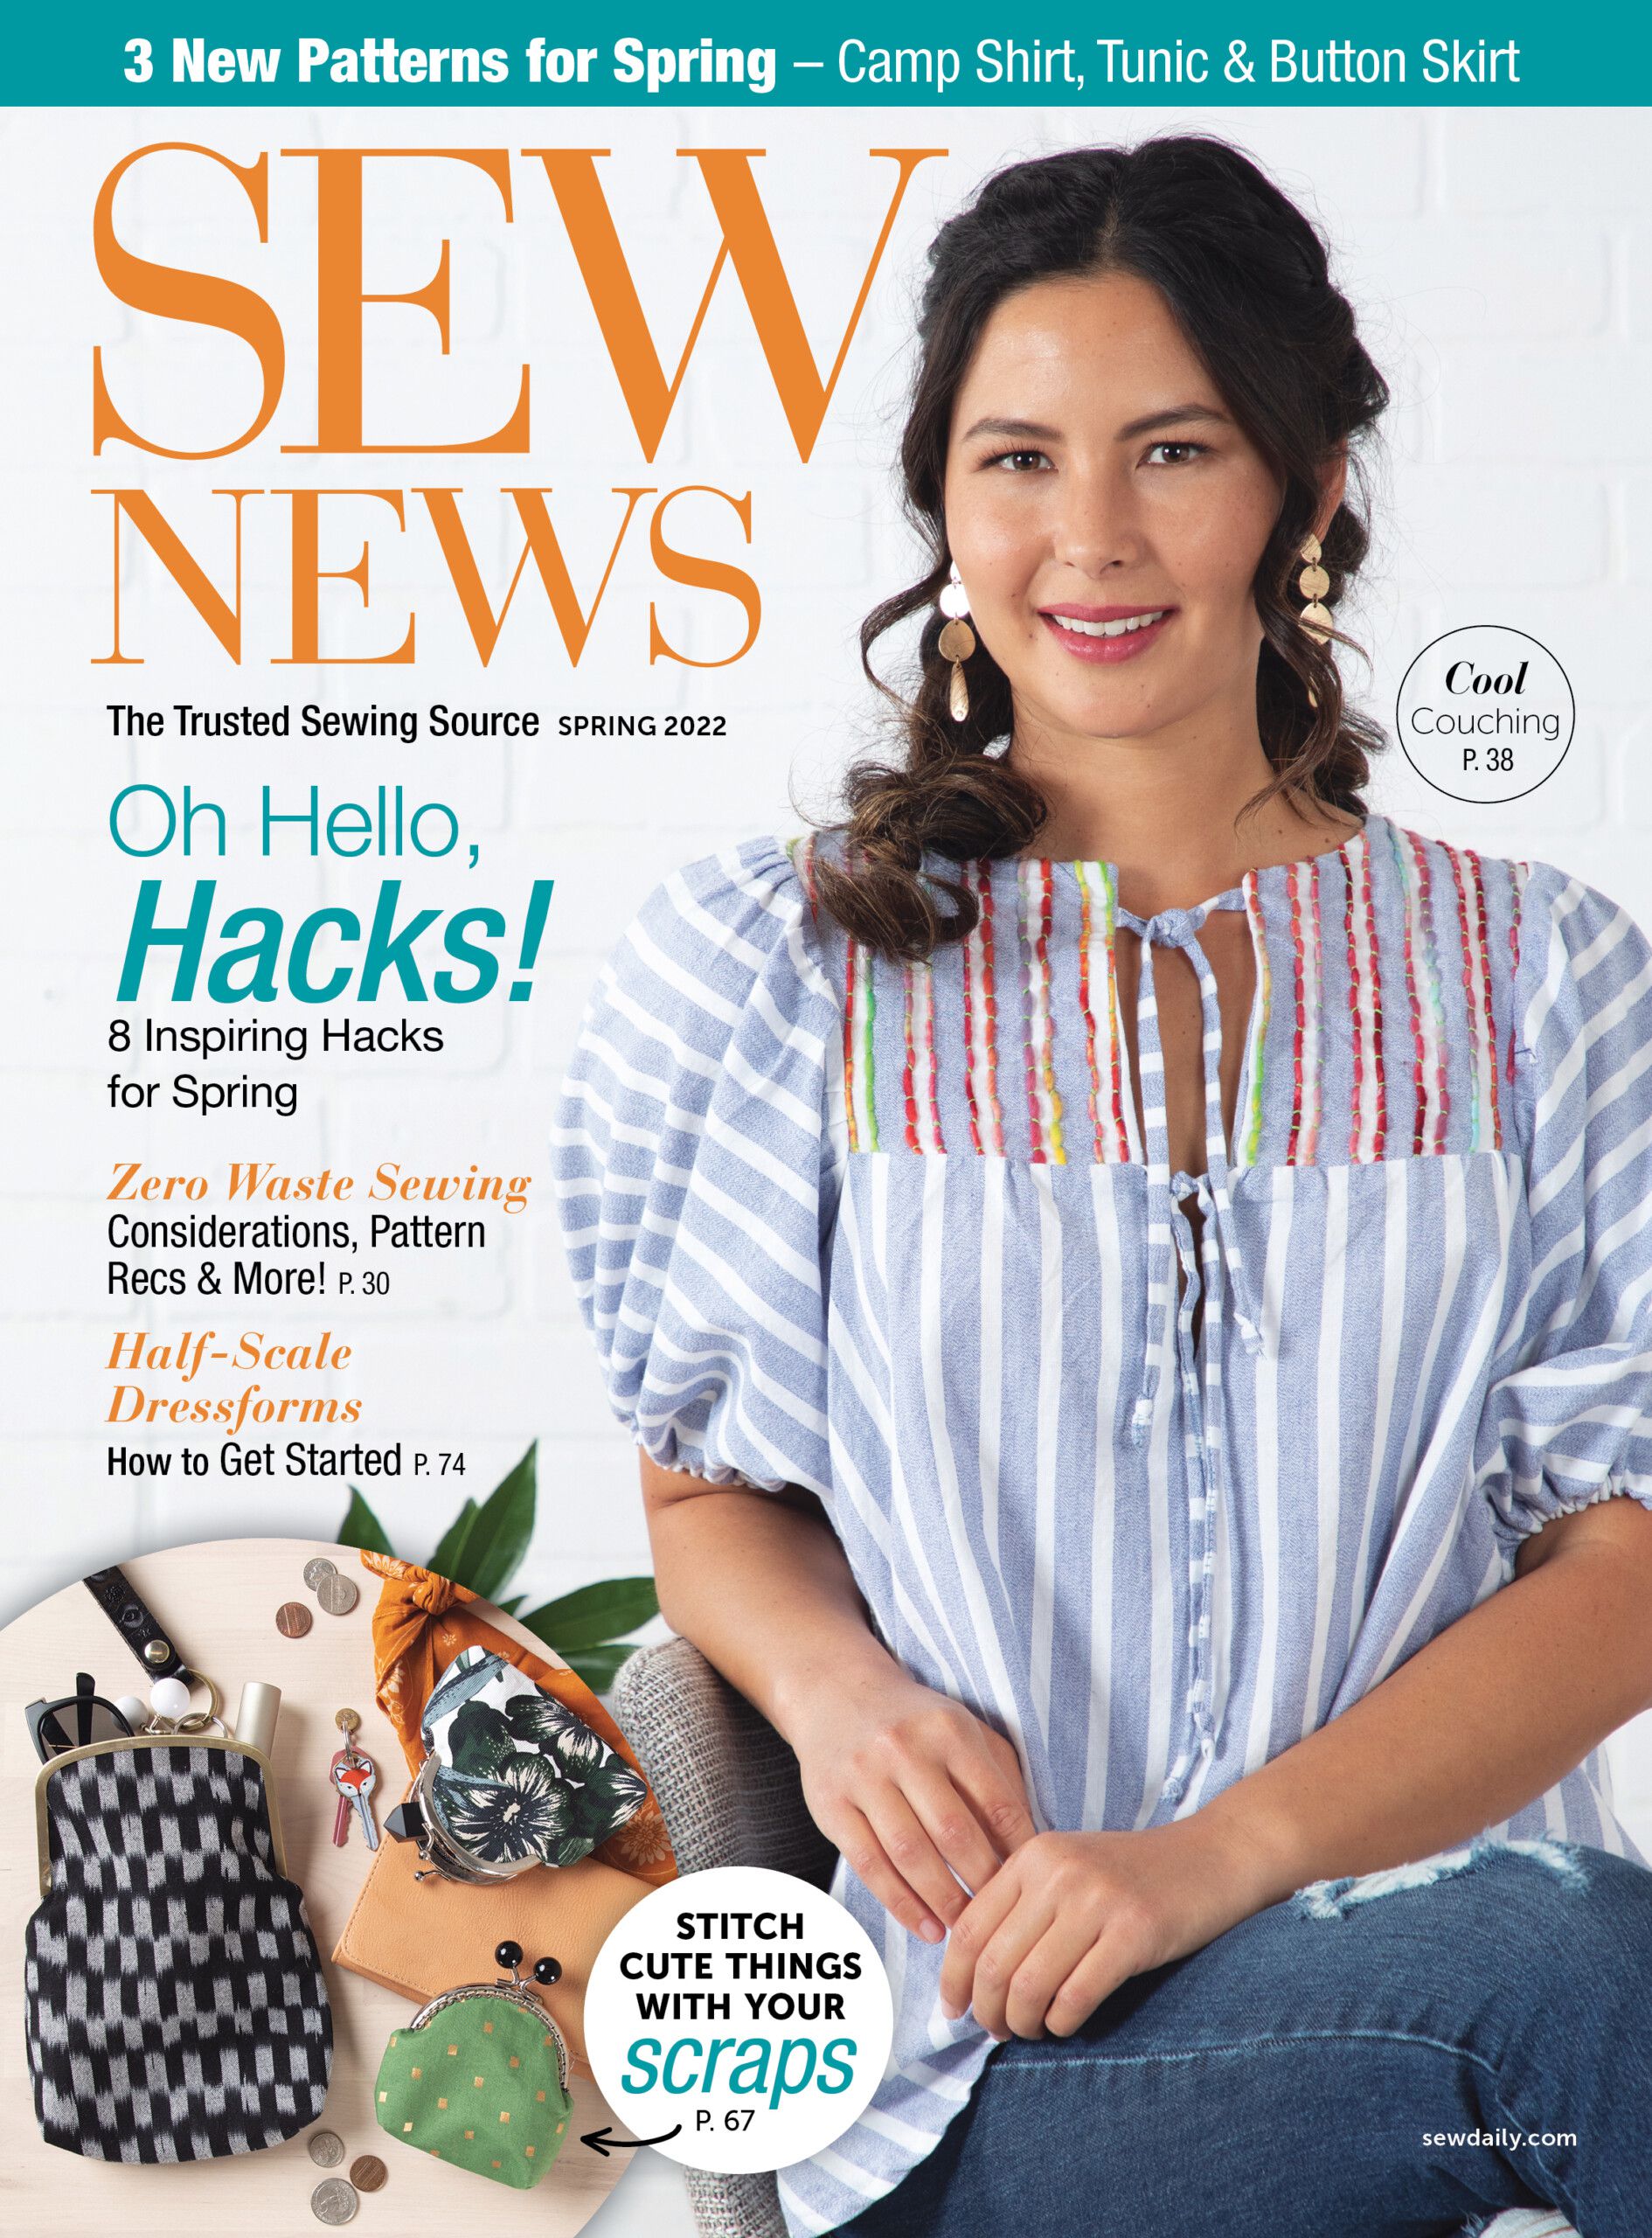 As Seen In Sew News Magazine: Spring 2022